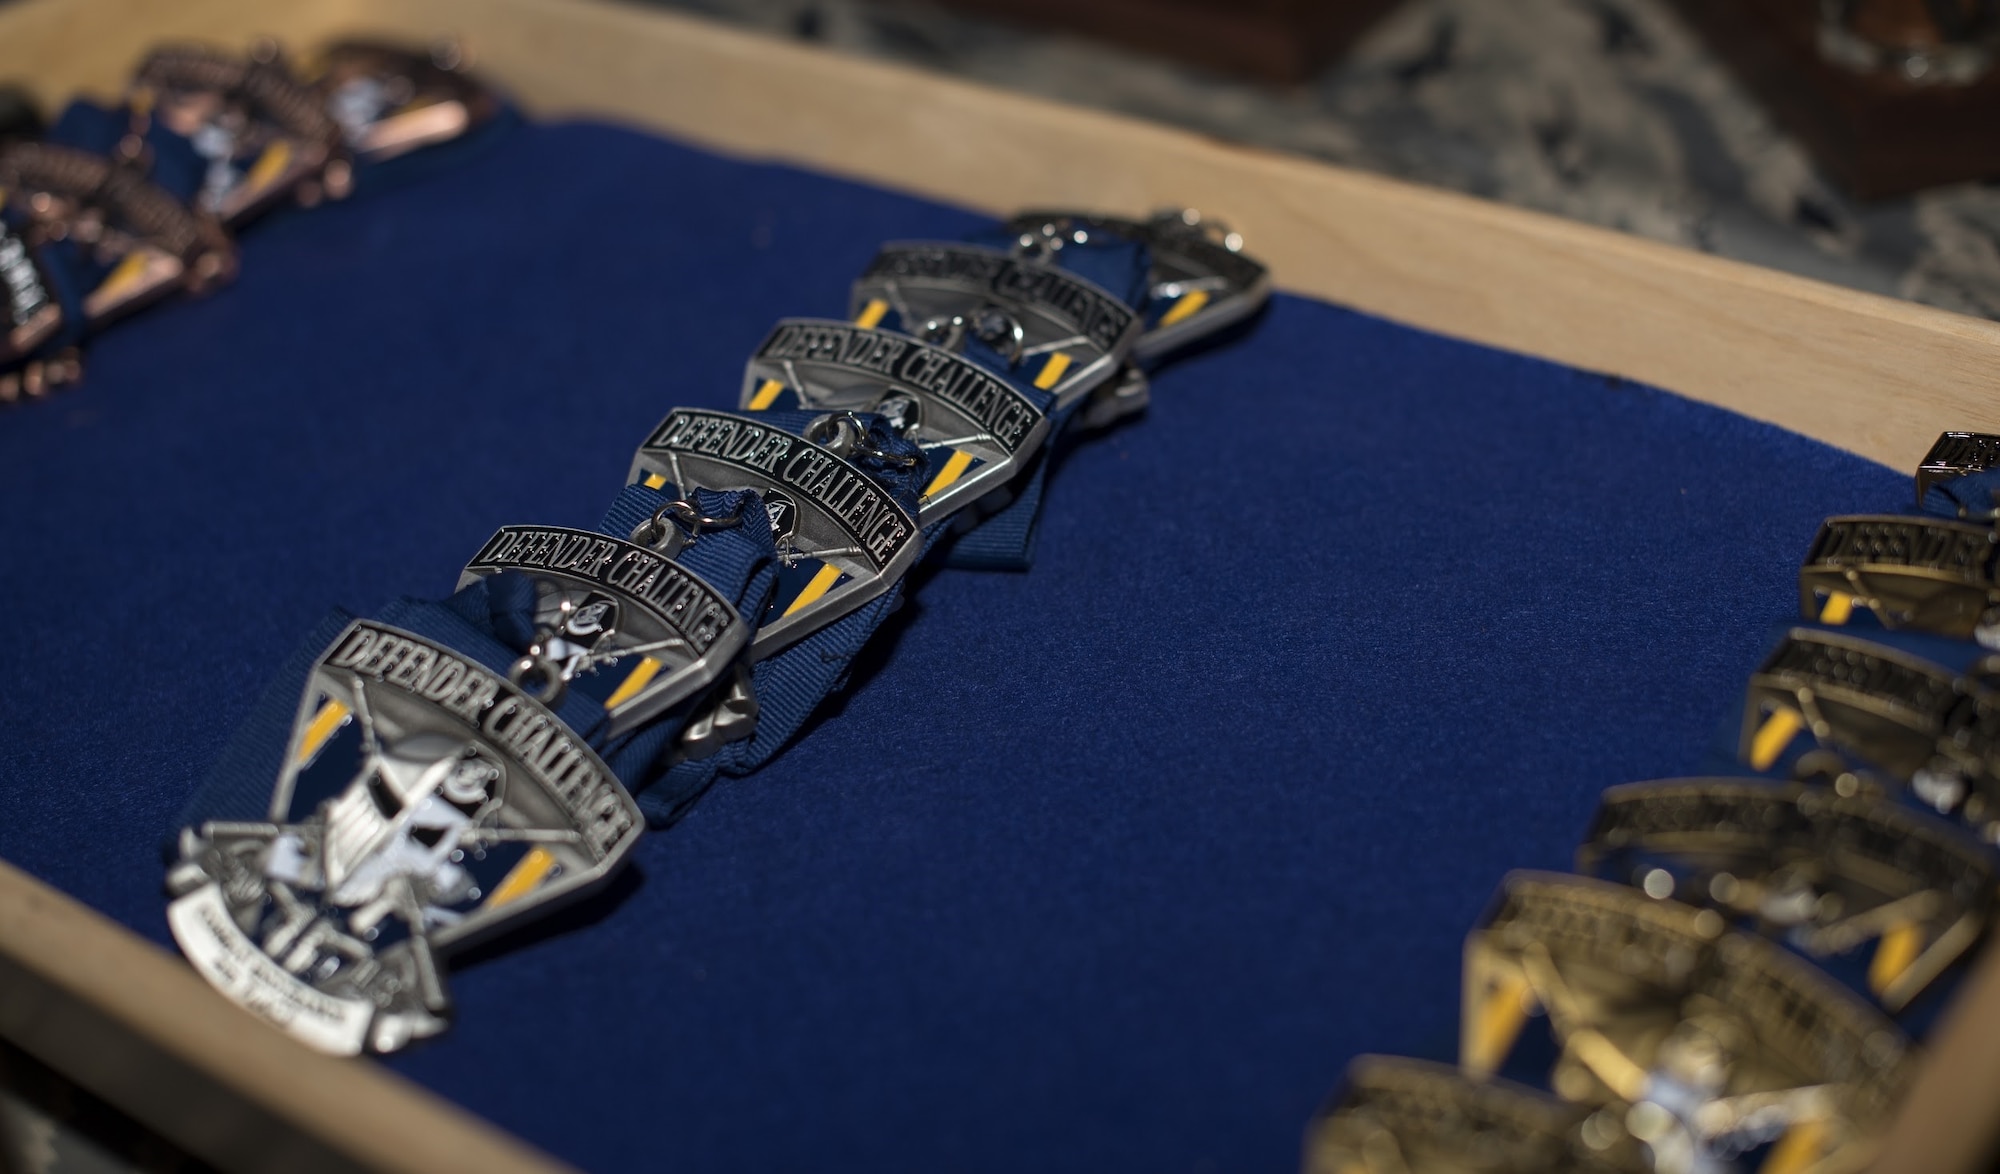 Medals sit in a tray during the 2018 Air Force Defender Challenge award ceremony on Joint Base San Antonio-Camp Bullis, Texas, Sept. 13, 2018. Gold, silver and bronze coins were awarded to place winners in the competition. The competition was comprised of weapons scenarios, dismounted operations and combat endurance. (U.S. Air Force photo by Airman Ariel Owings)